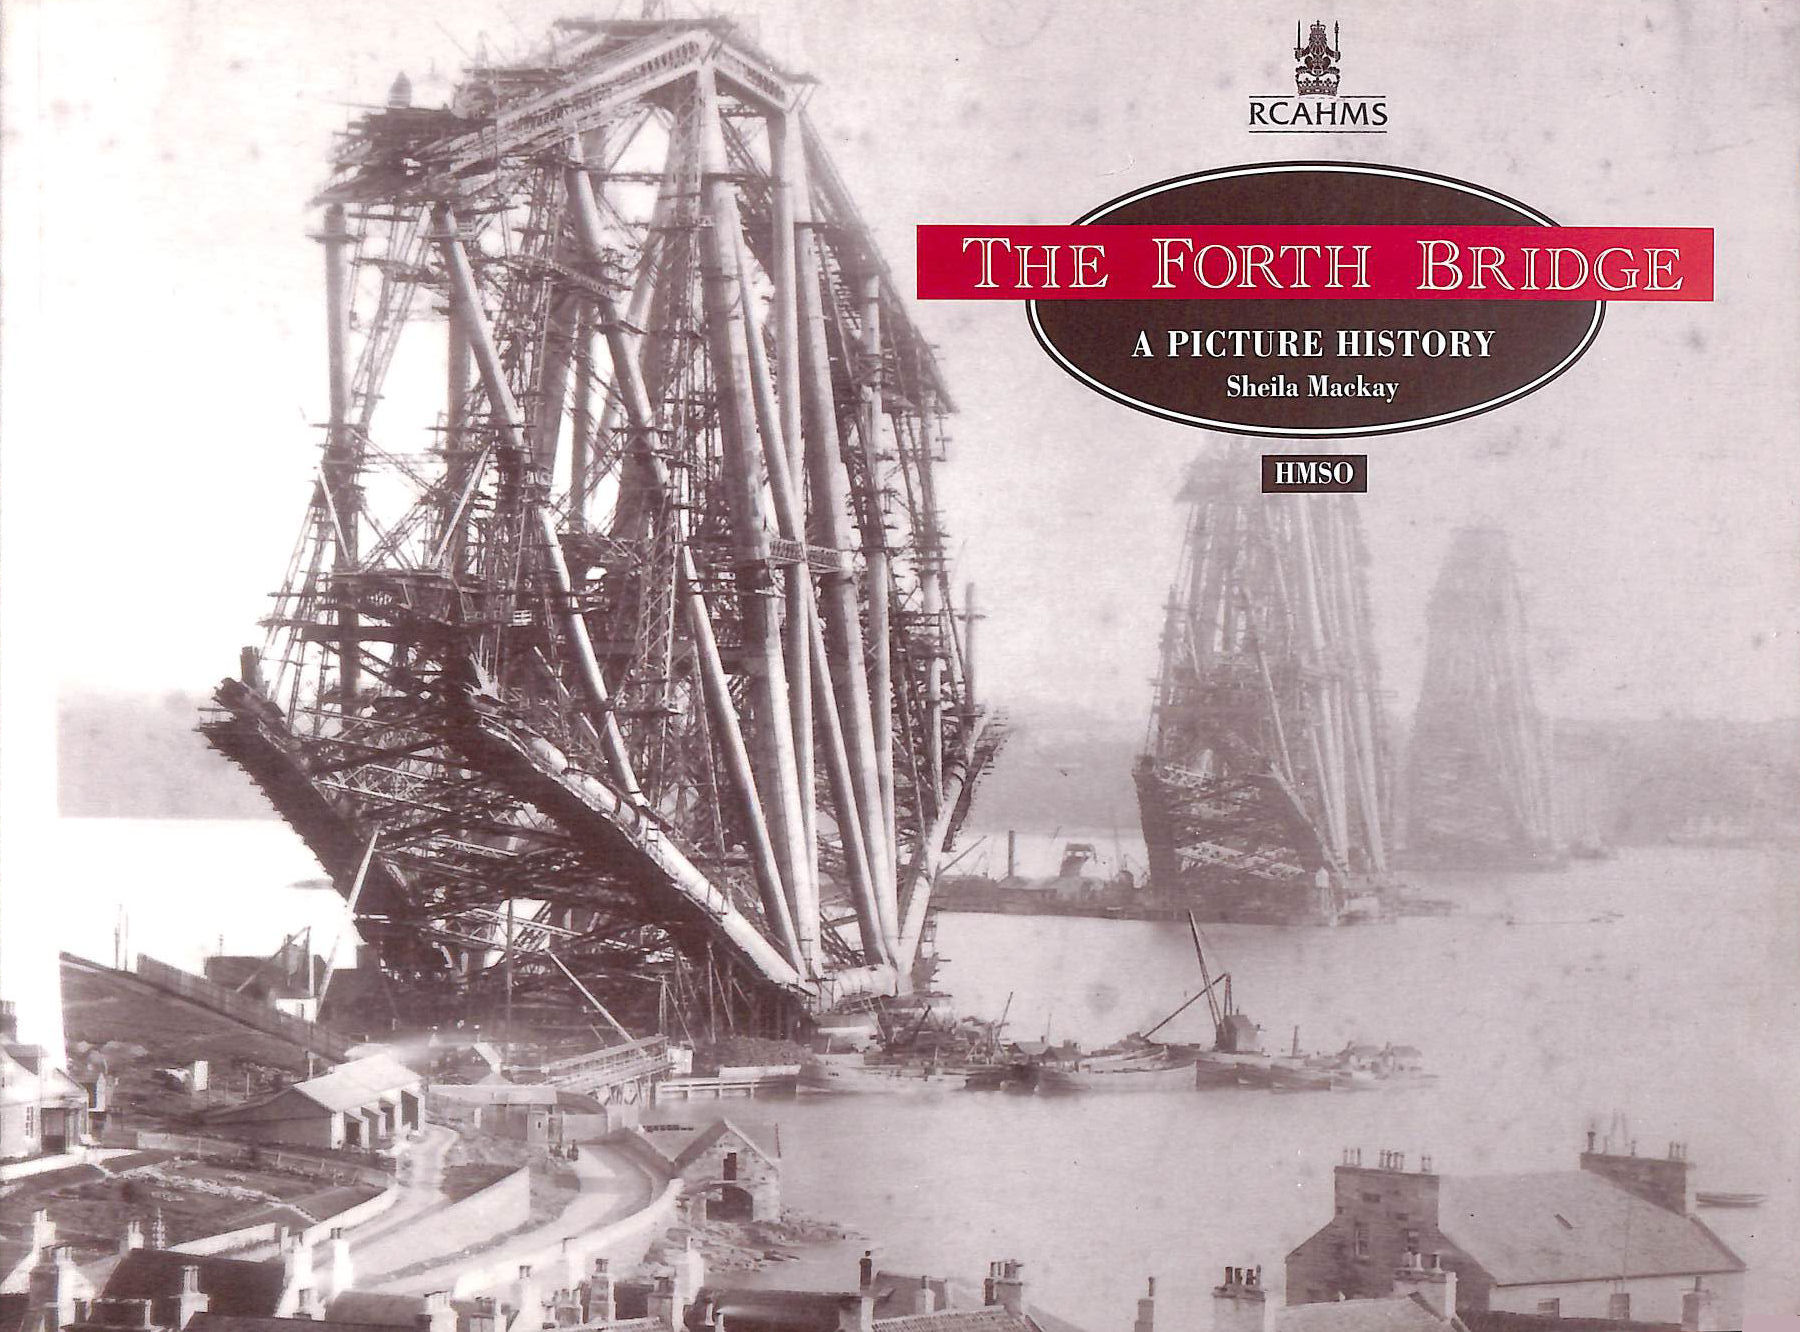 ROYAL COMMISSION ON THE ANCIENT AND HISTORICAL MONUMENTS OF SCOTLAND - The Forth Bridge: A Picture History